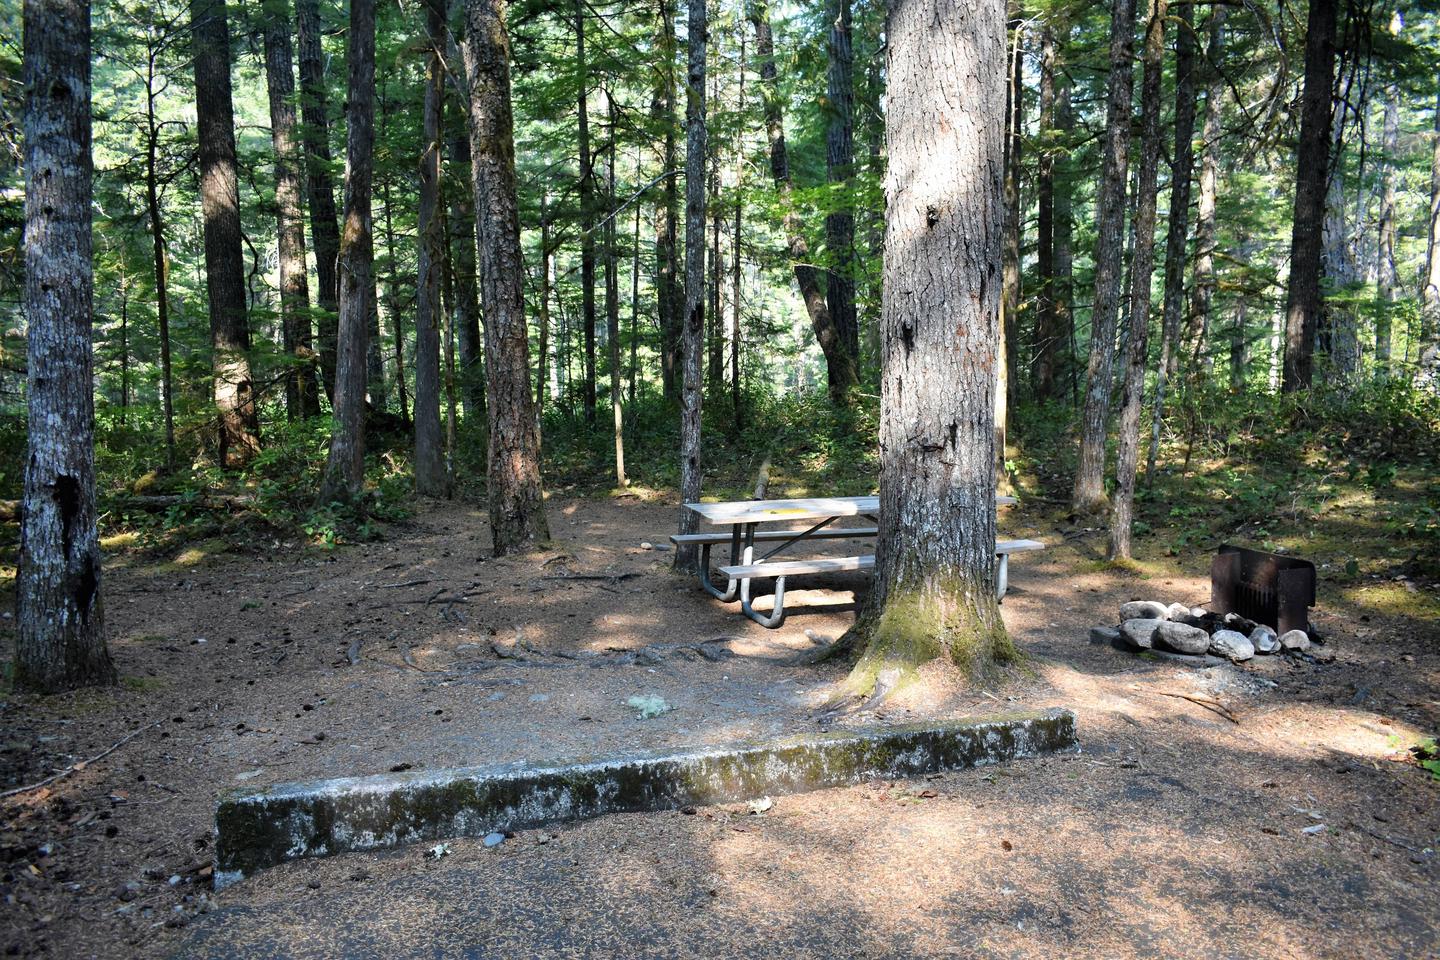 Tent area, picnic table, and fire ringView of campsite